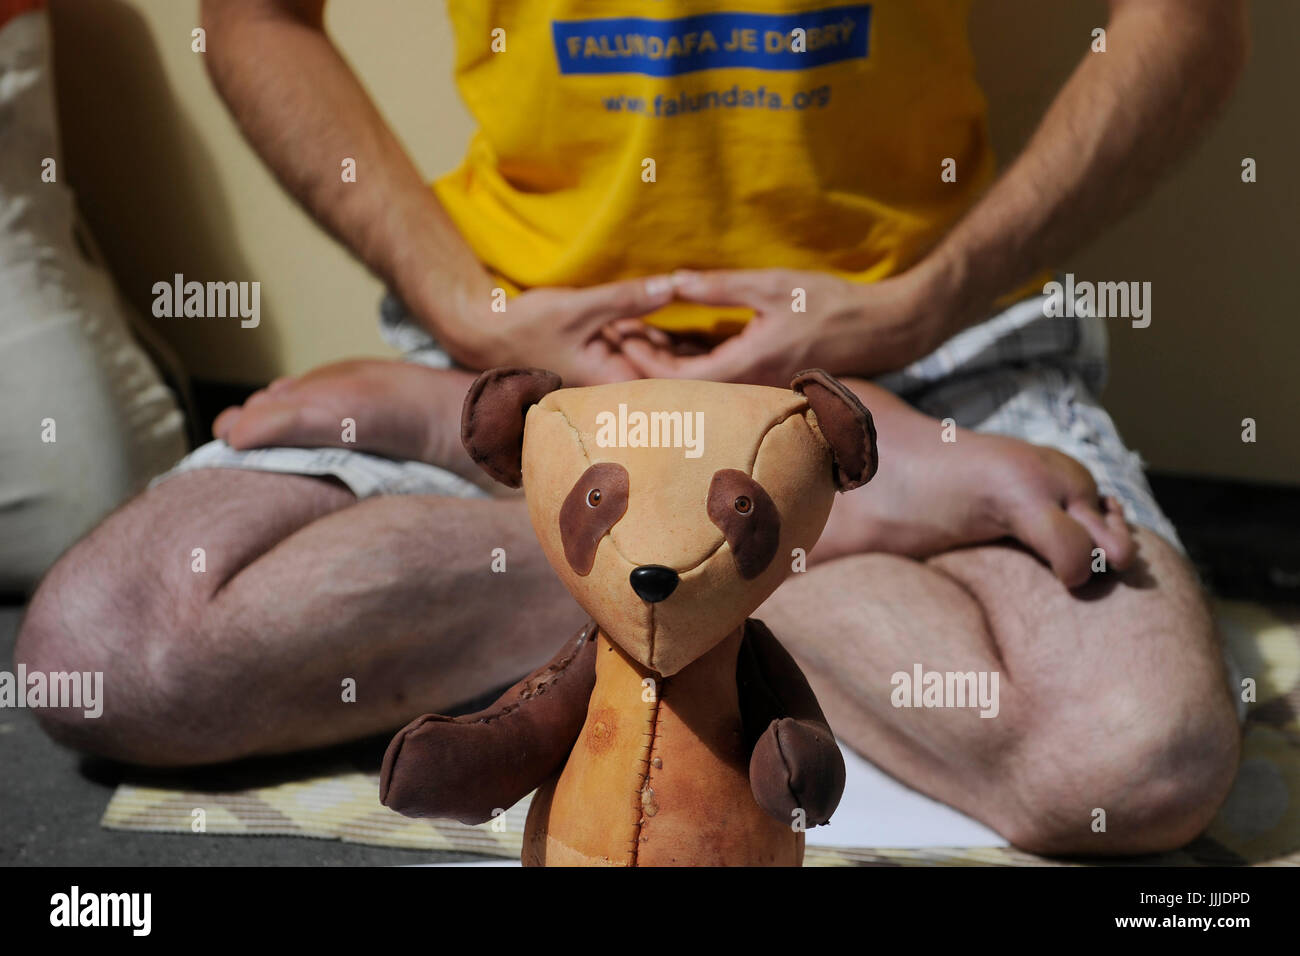 Prague, Czech Republic. 20th July, 2017. Falun Gong practitioner commemorates the 18th anniversary of their persecution in China in front of the Chinese Embassy building in Prague, Czech Republic, on July 20, 2017. Picture shows the one of pandas from silicone which imitates human skin, created by artist Barbora Balkova, symbolize thousands victims of organ trafficking in China. Credit: Ondrej Deml/CTK Photo/Alamy Live News Stock Photo